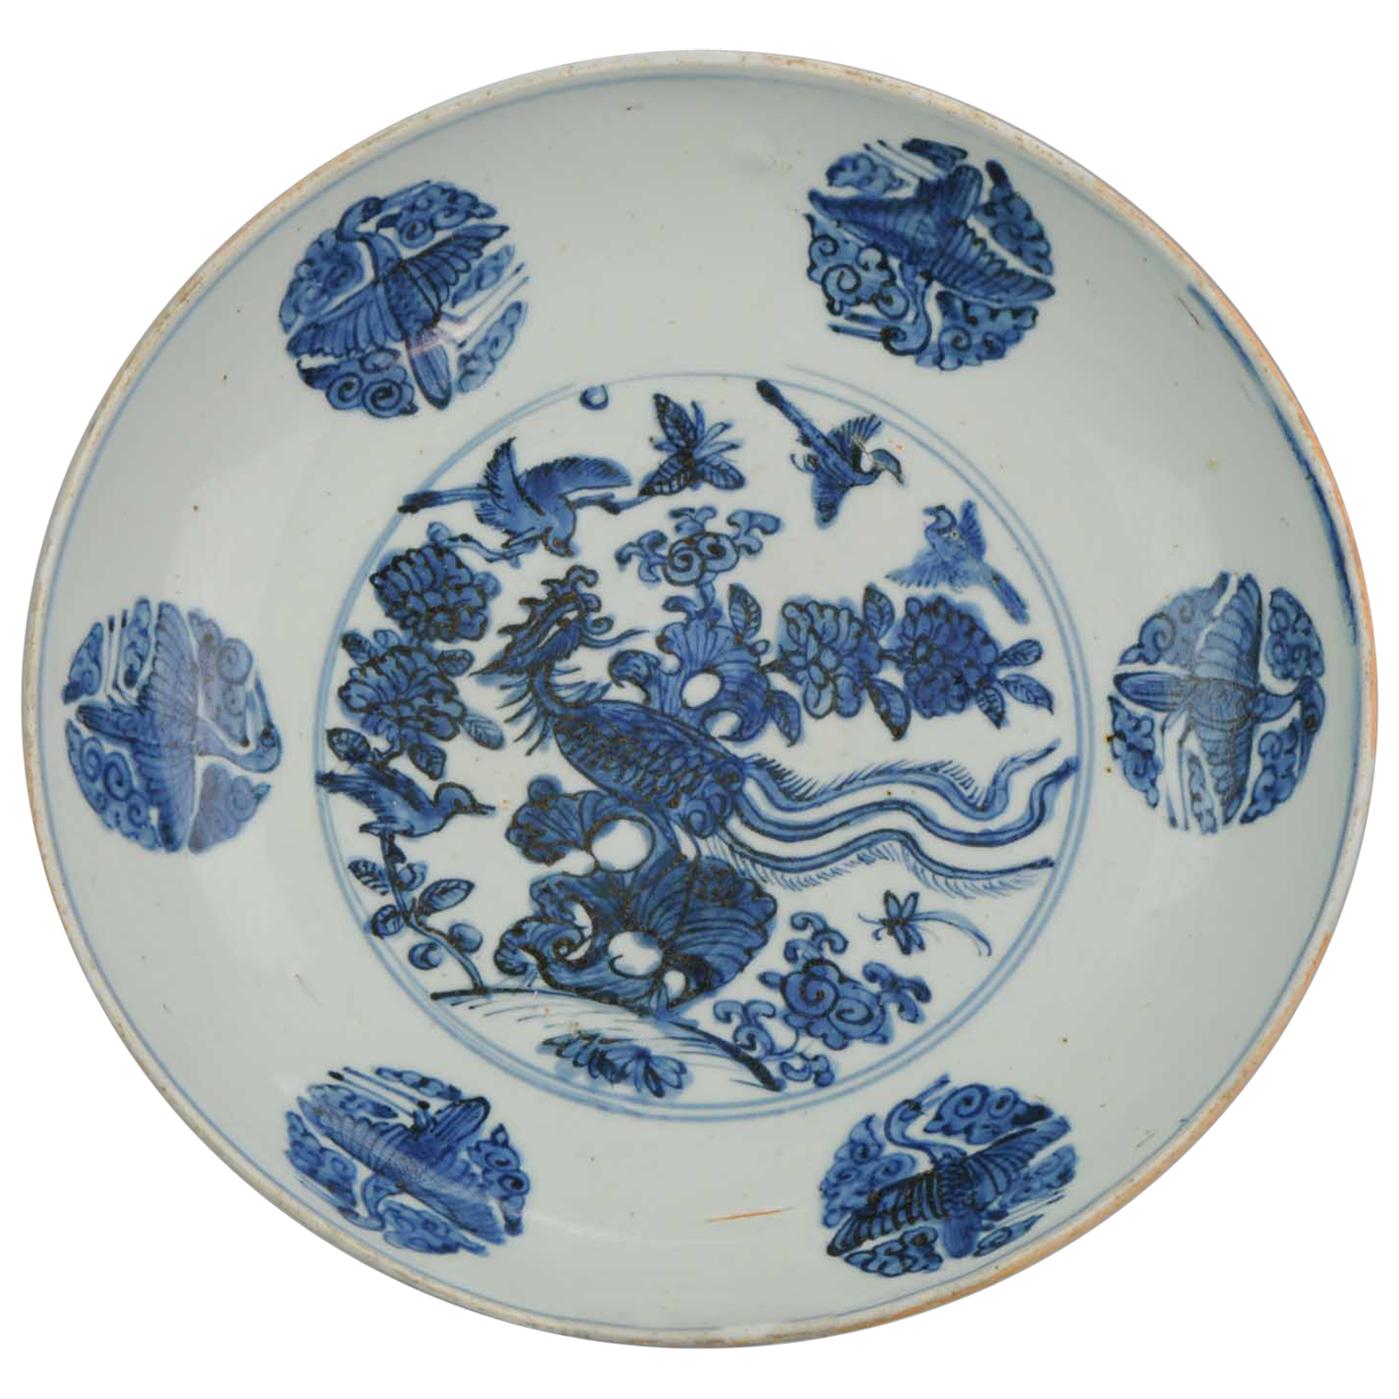 16th Century Period Chinese Porcelain Dish Charger Phoenix Flowers Antique Marke